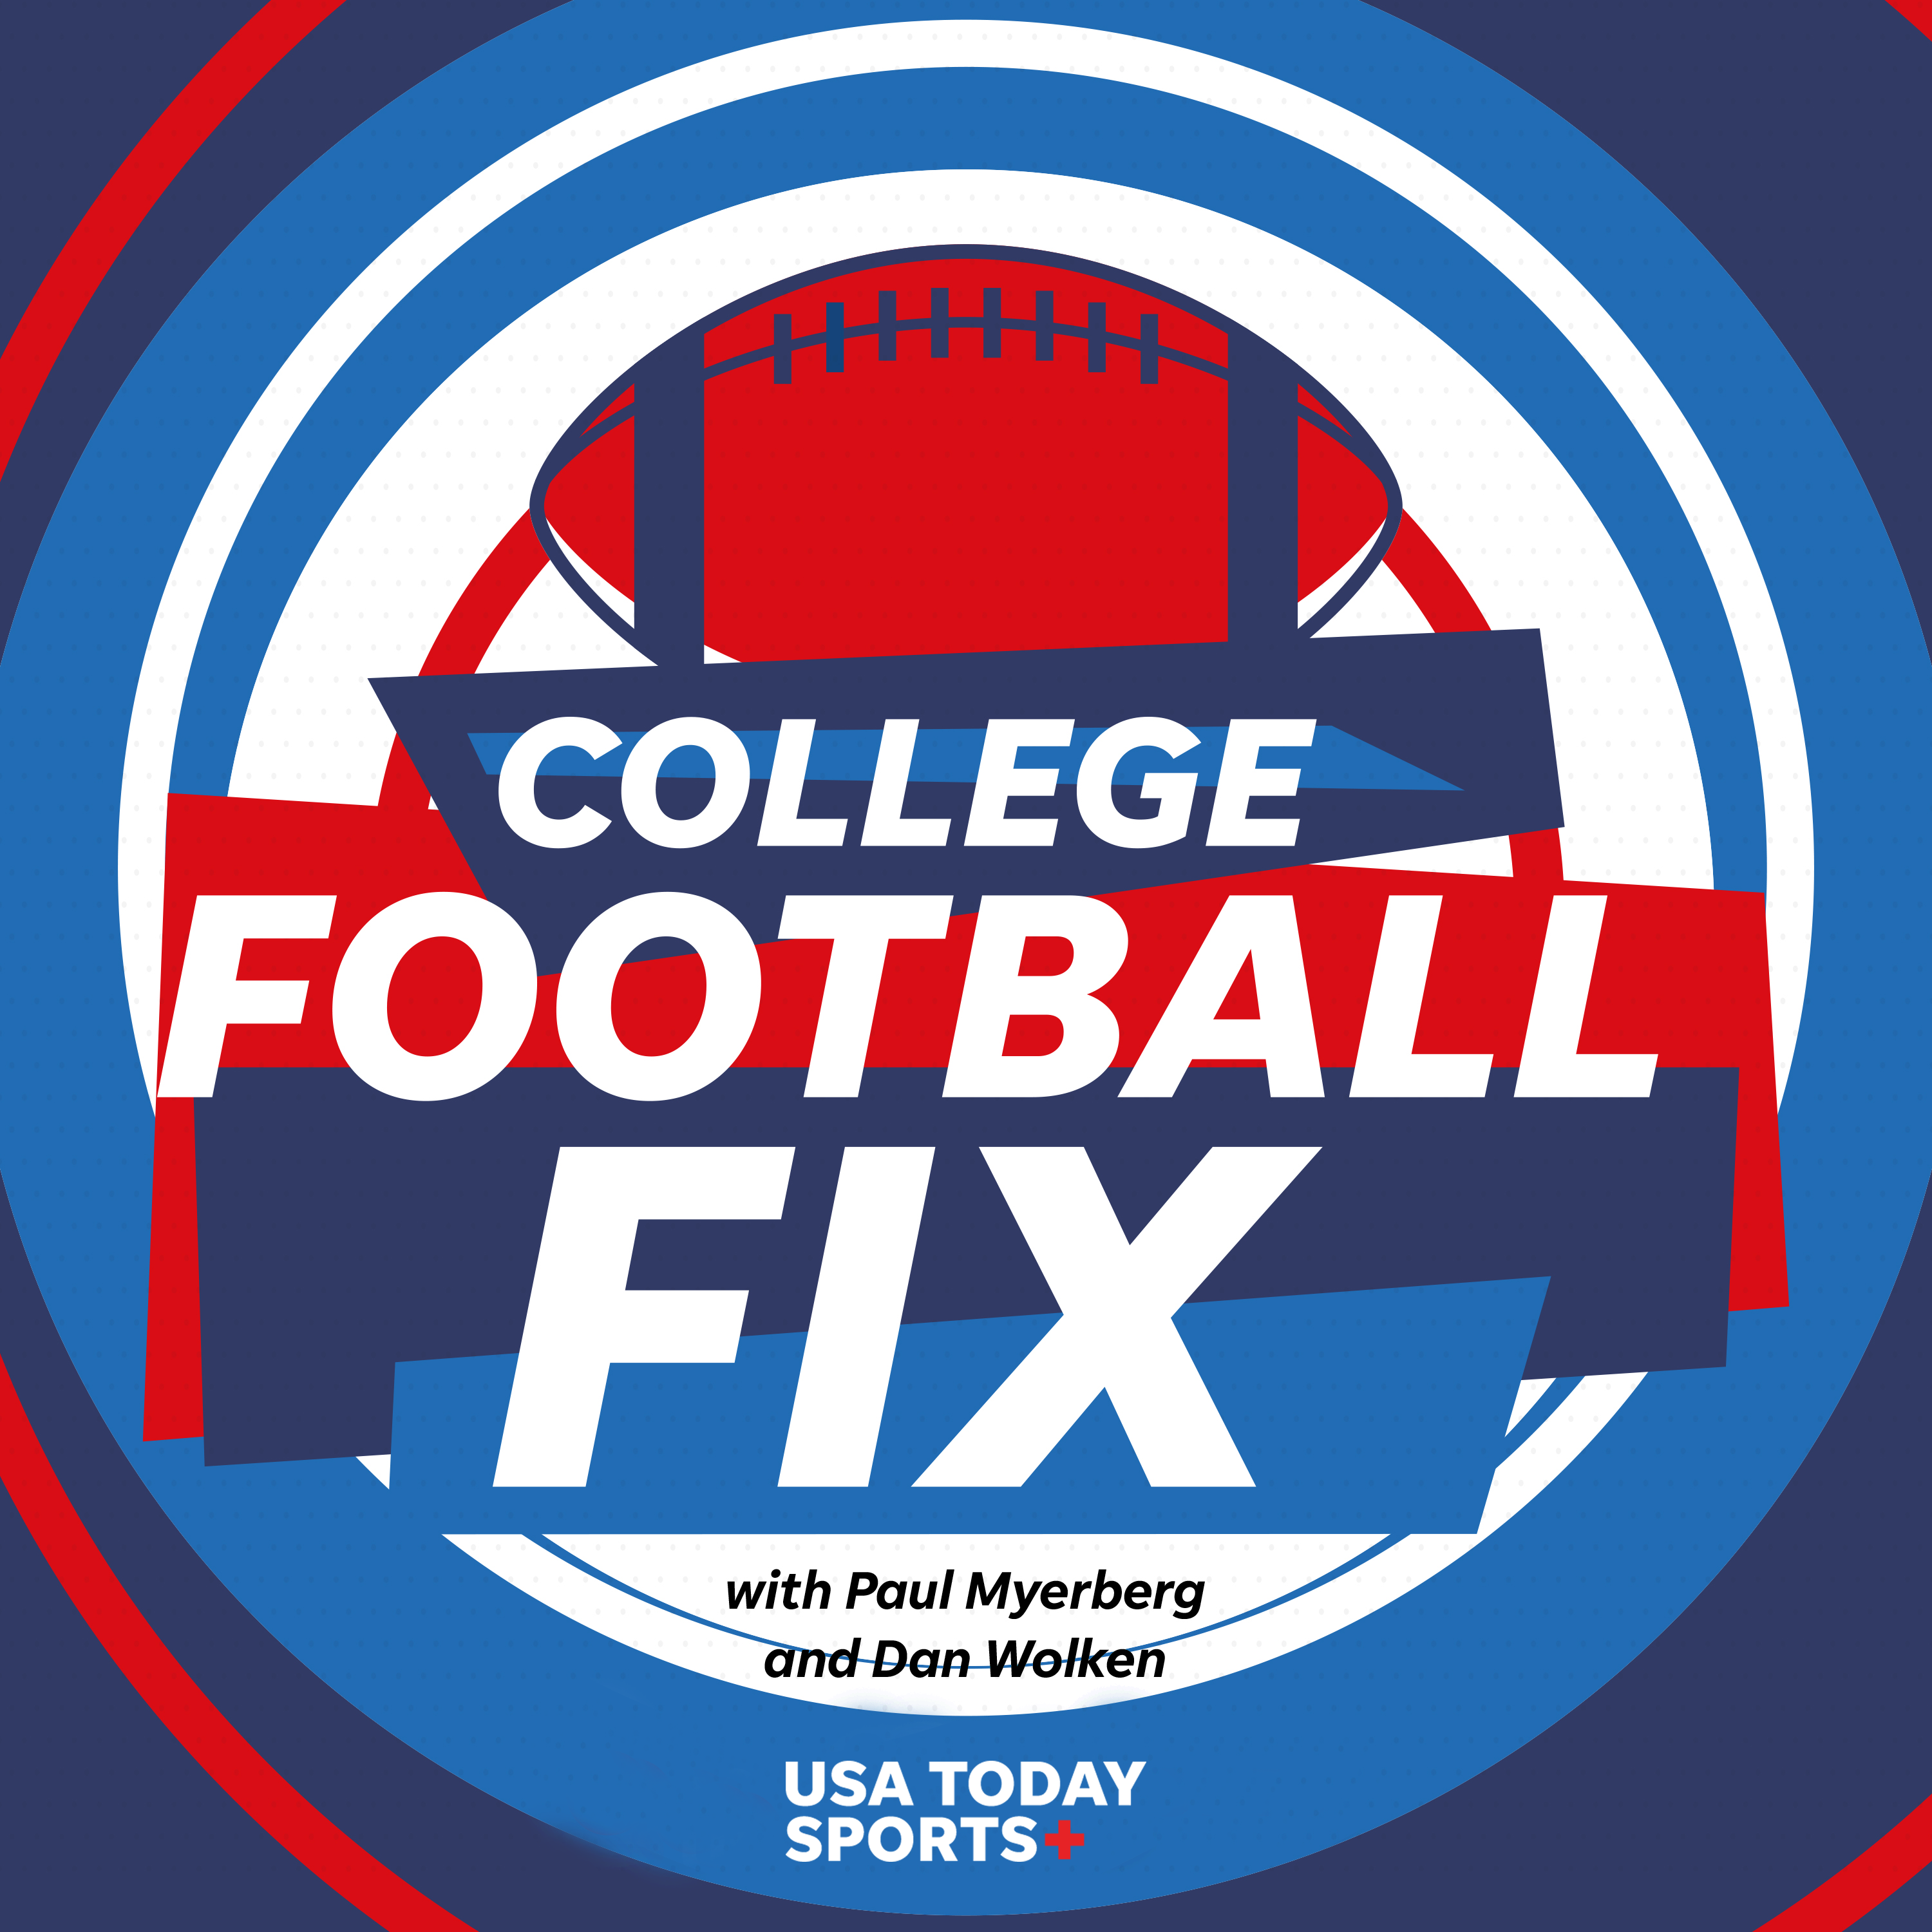 College Football Fix with Paul Myerberg and Dan Wolken - Previewing the Georgia-Alabama national championship game